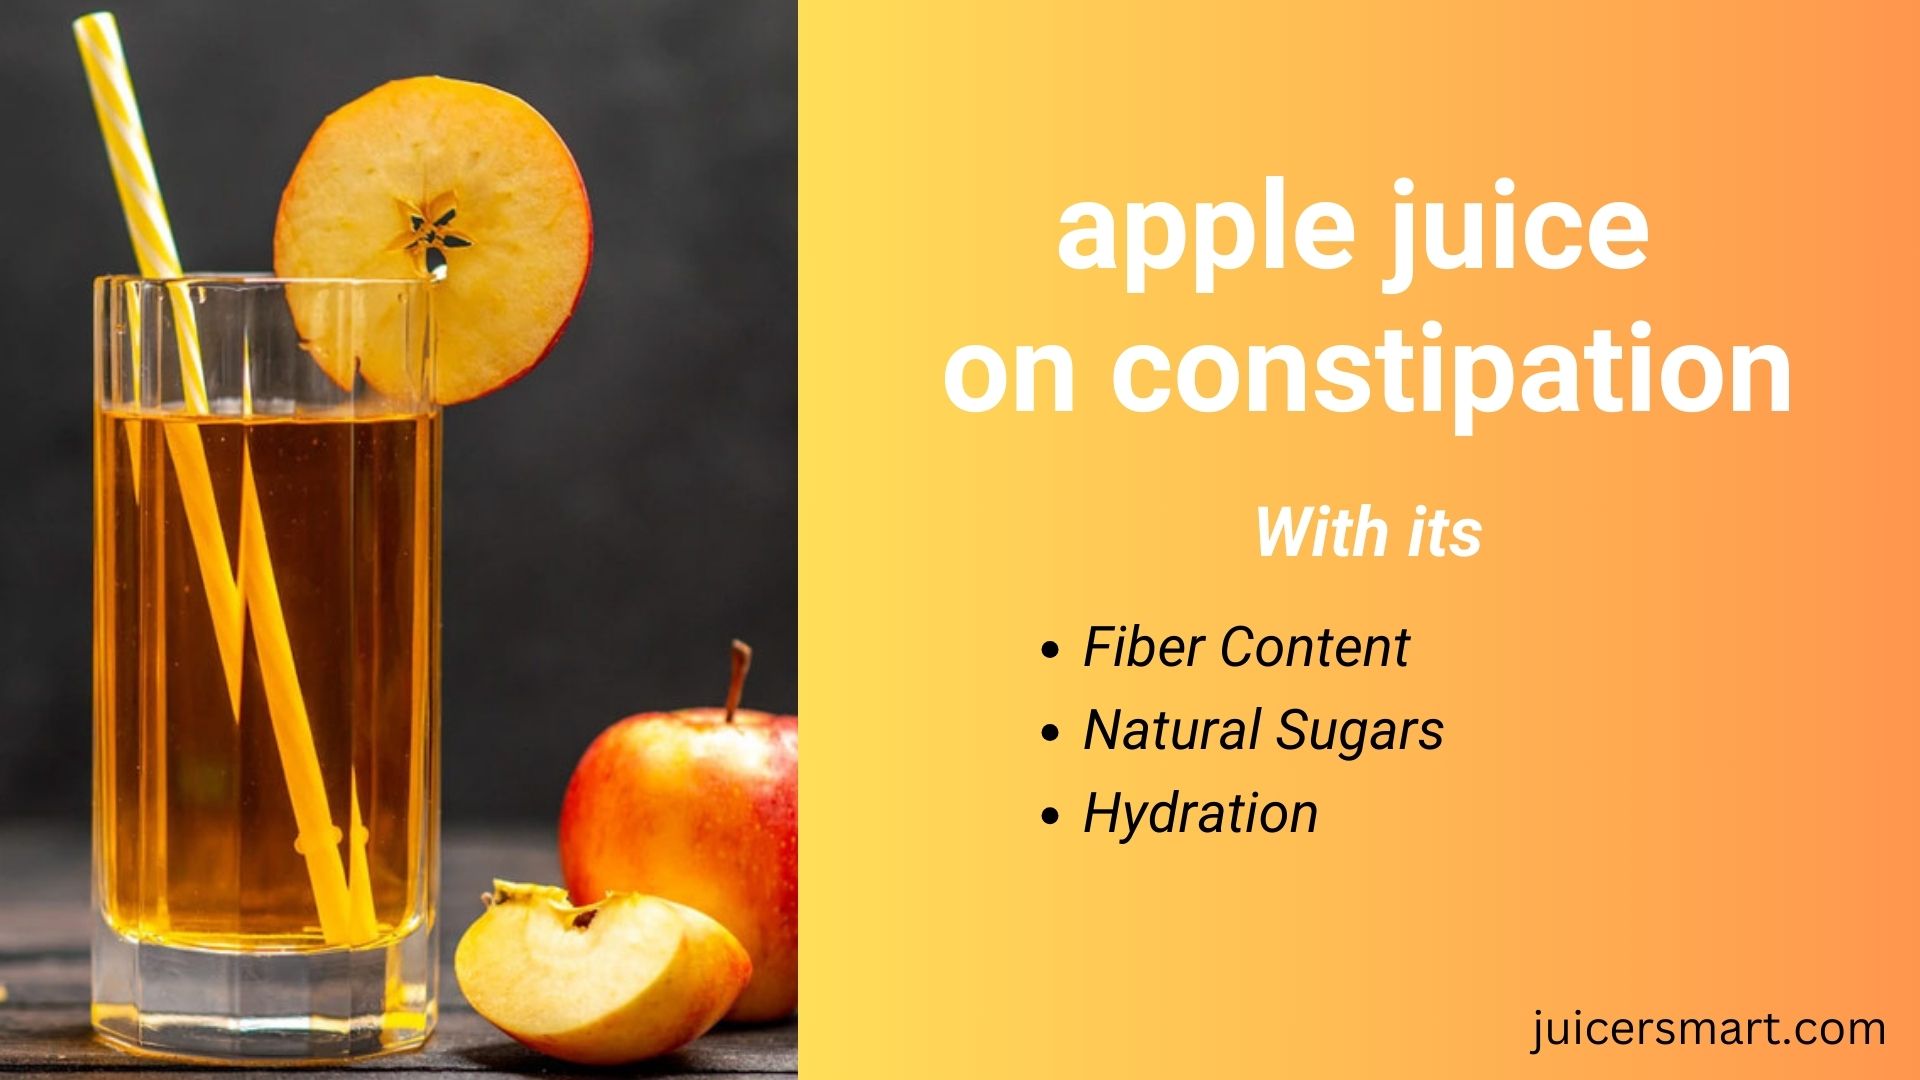 Does apple juice help with constipation